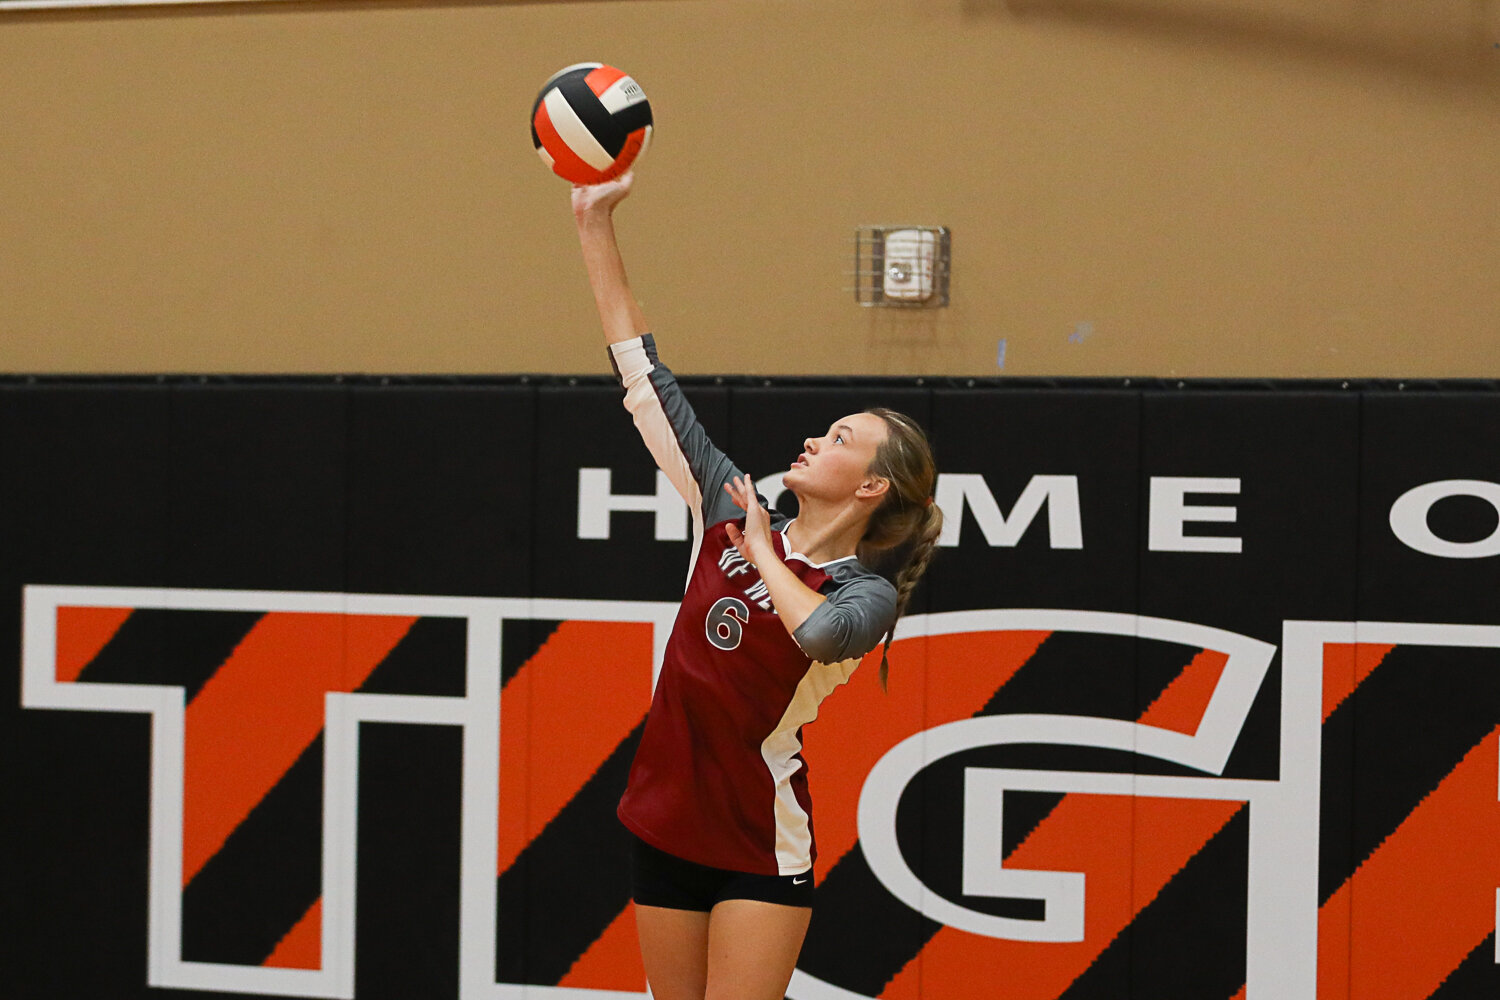 Grace Simpson serves during the first set of W.F. West's loss at Centralia on Sept. 21.